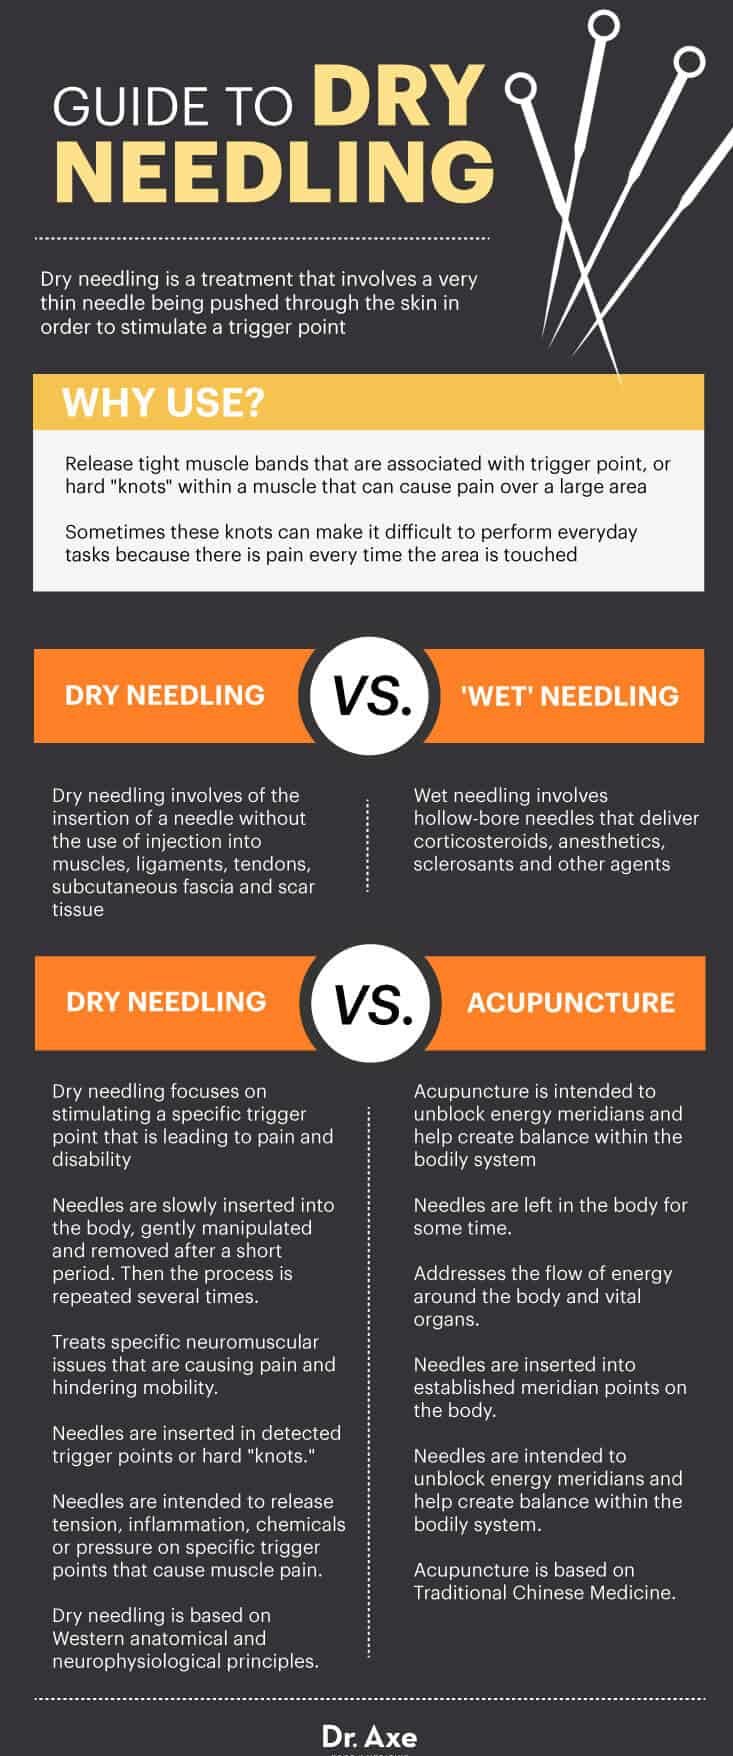 Guide to dry needling - Dr. Axe